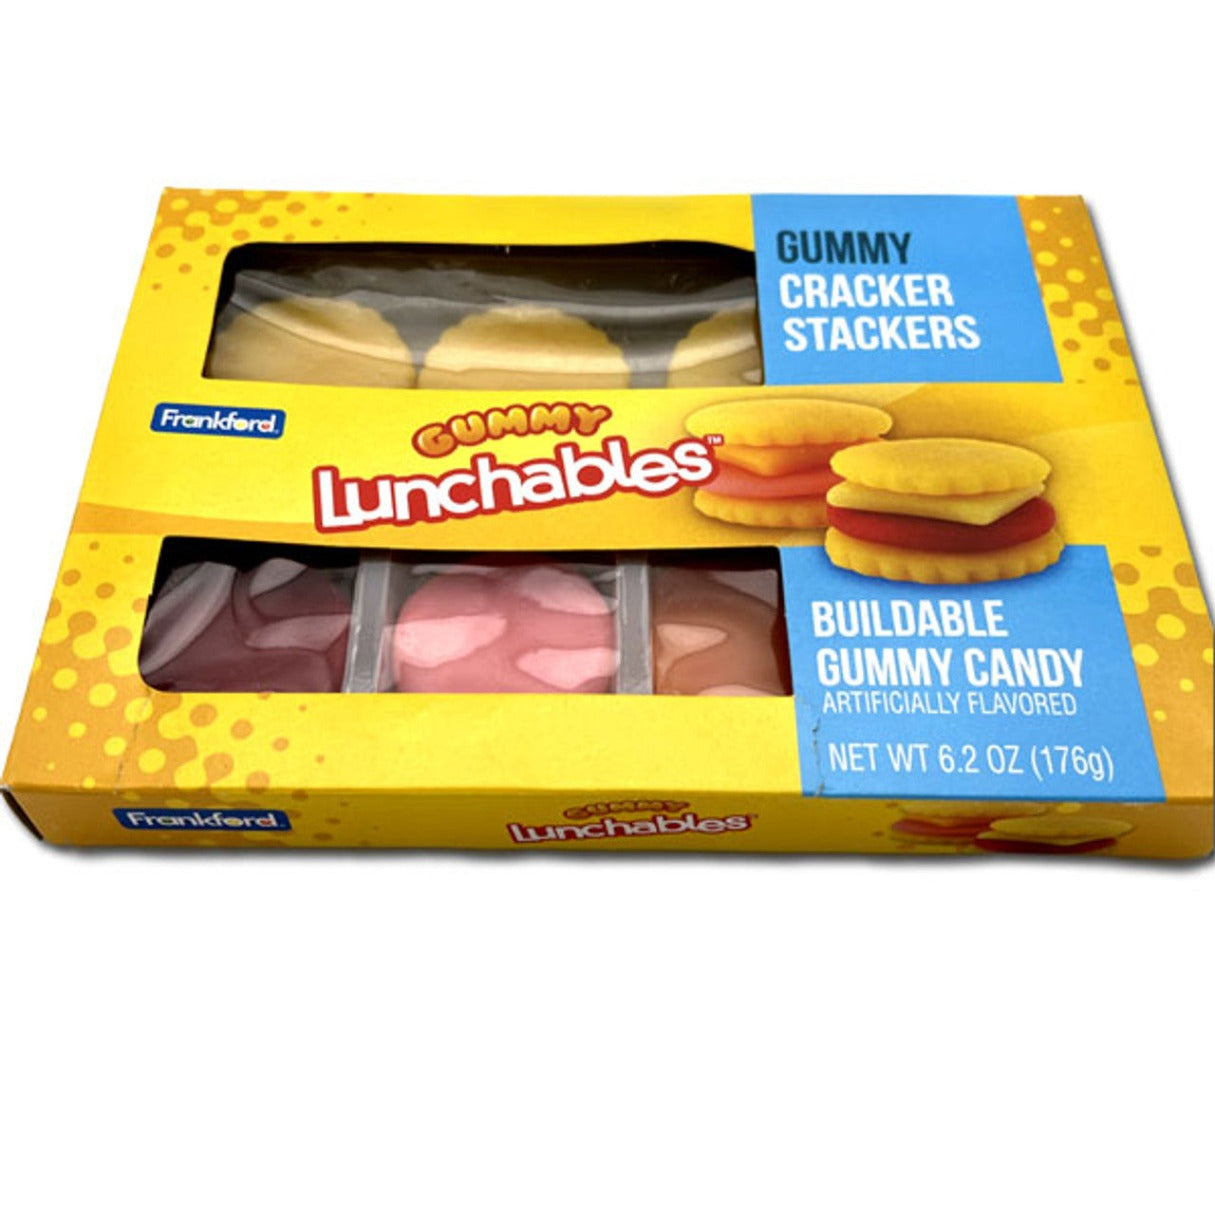 Frankford Gummy Lunchables Cracker Stacker 6.2oz - 10ct